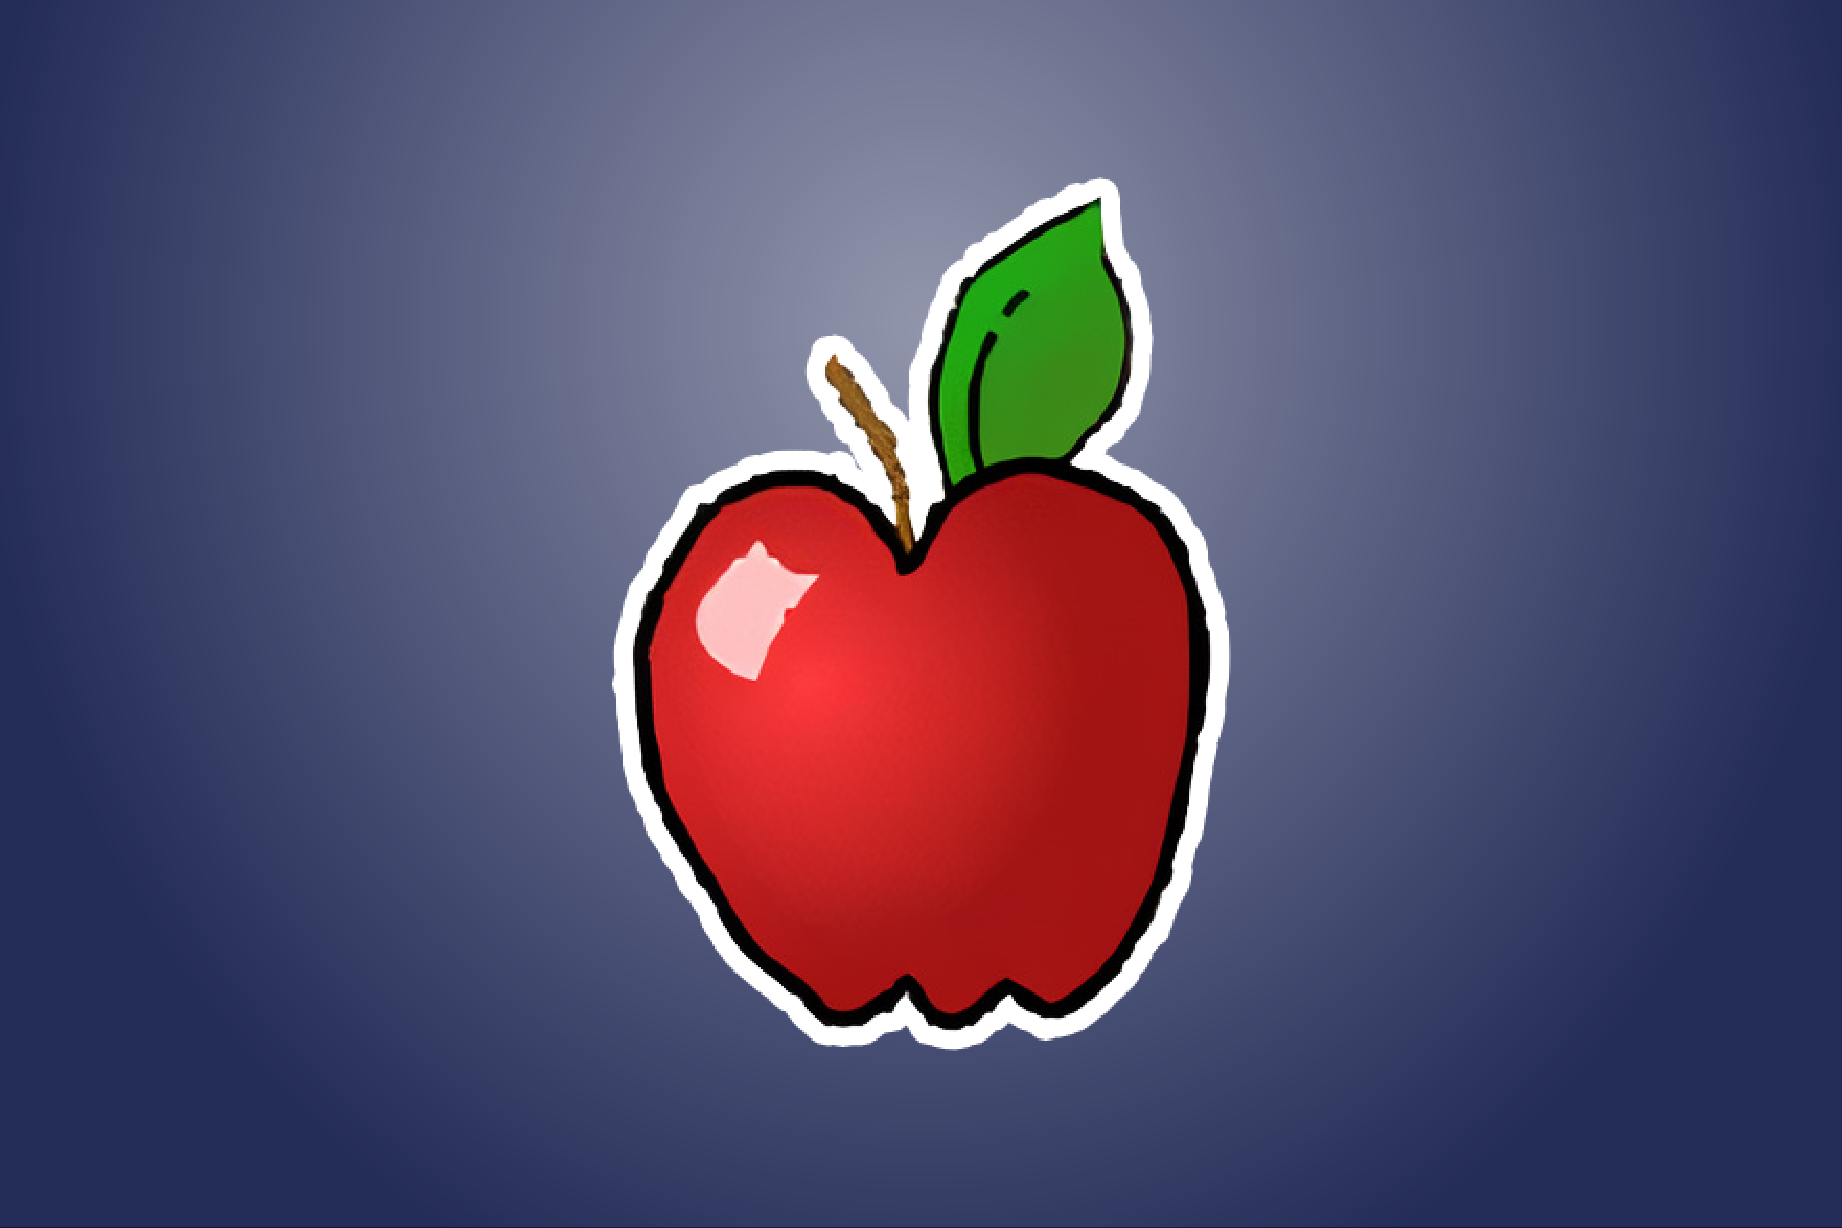 Applean apple on a blue background